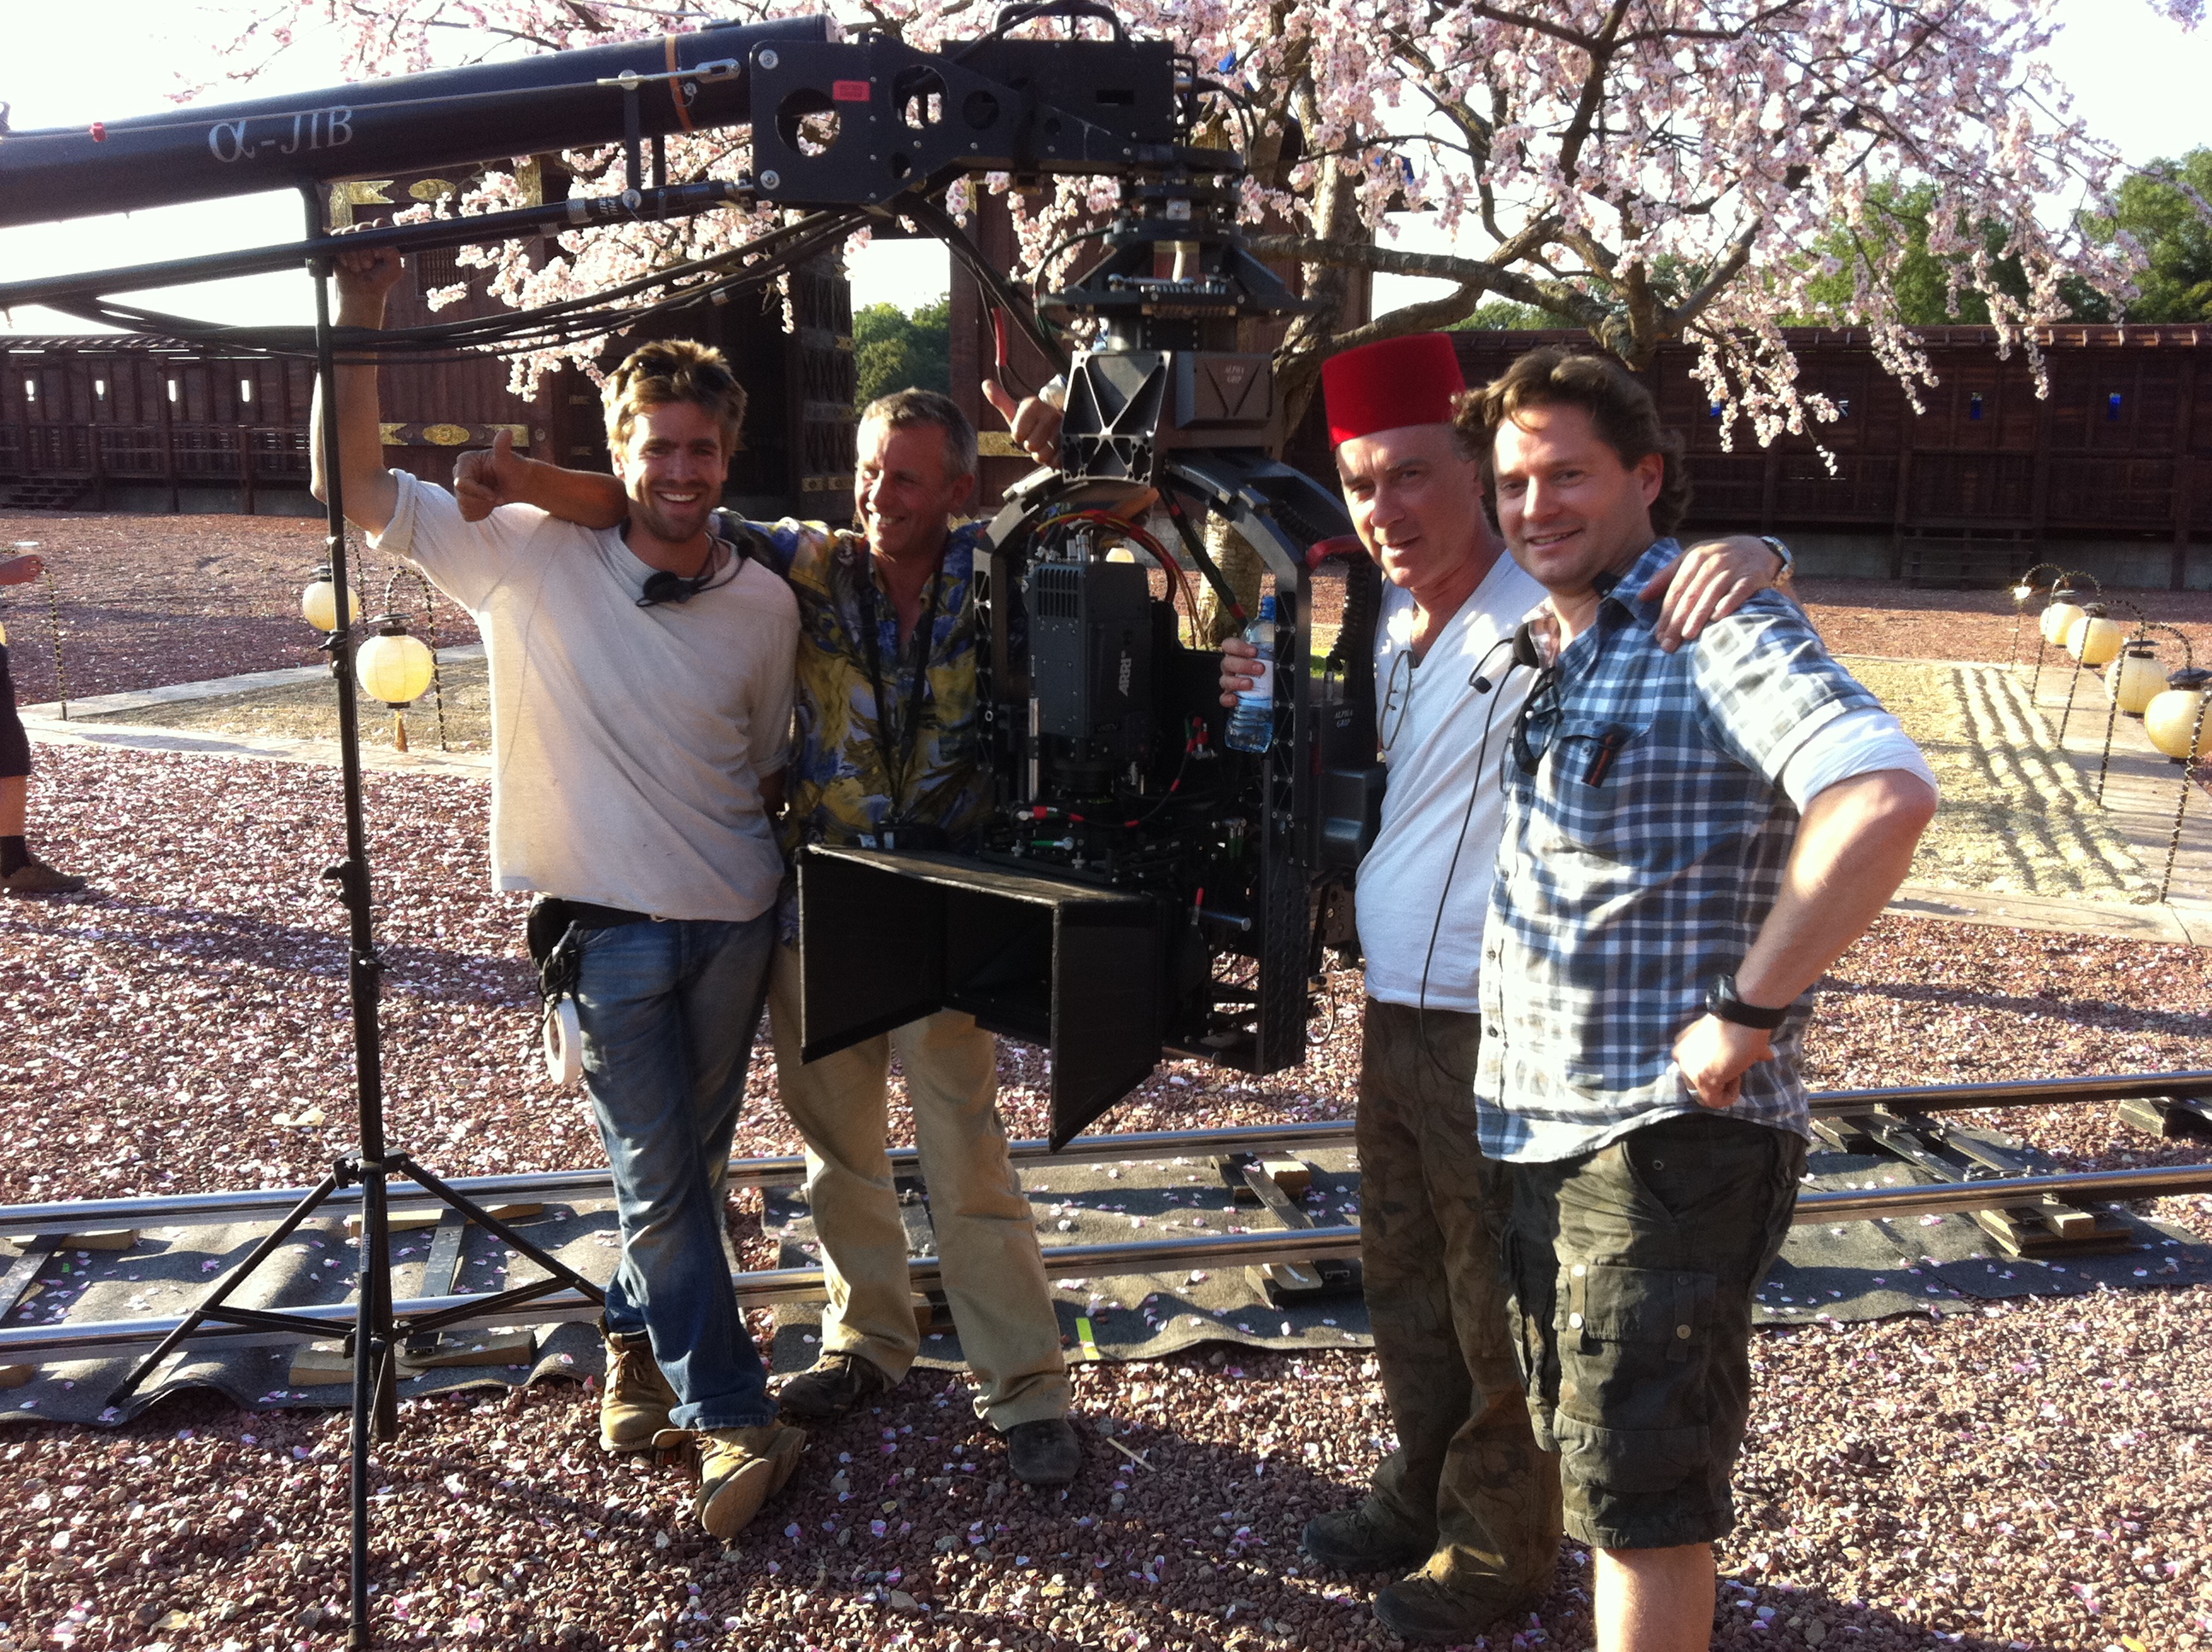 47 Ronin - camera team, 2011. Left to right: Lewis Hume (2nd ac) Simon Hume (1st ac) John Mathieson (DOP) and Demetri Portelli (Stereographer)